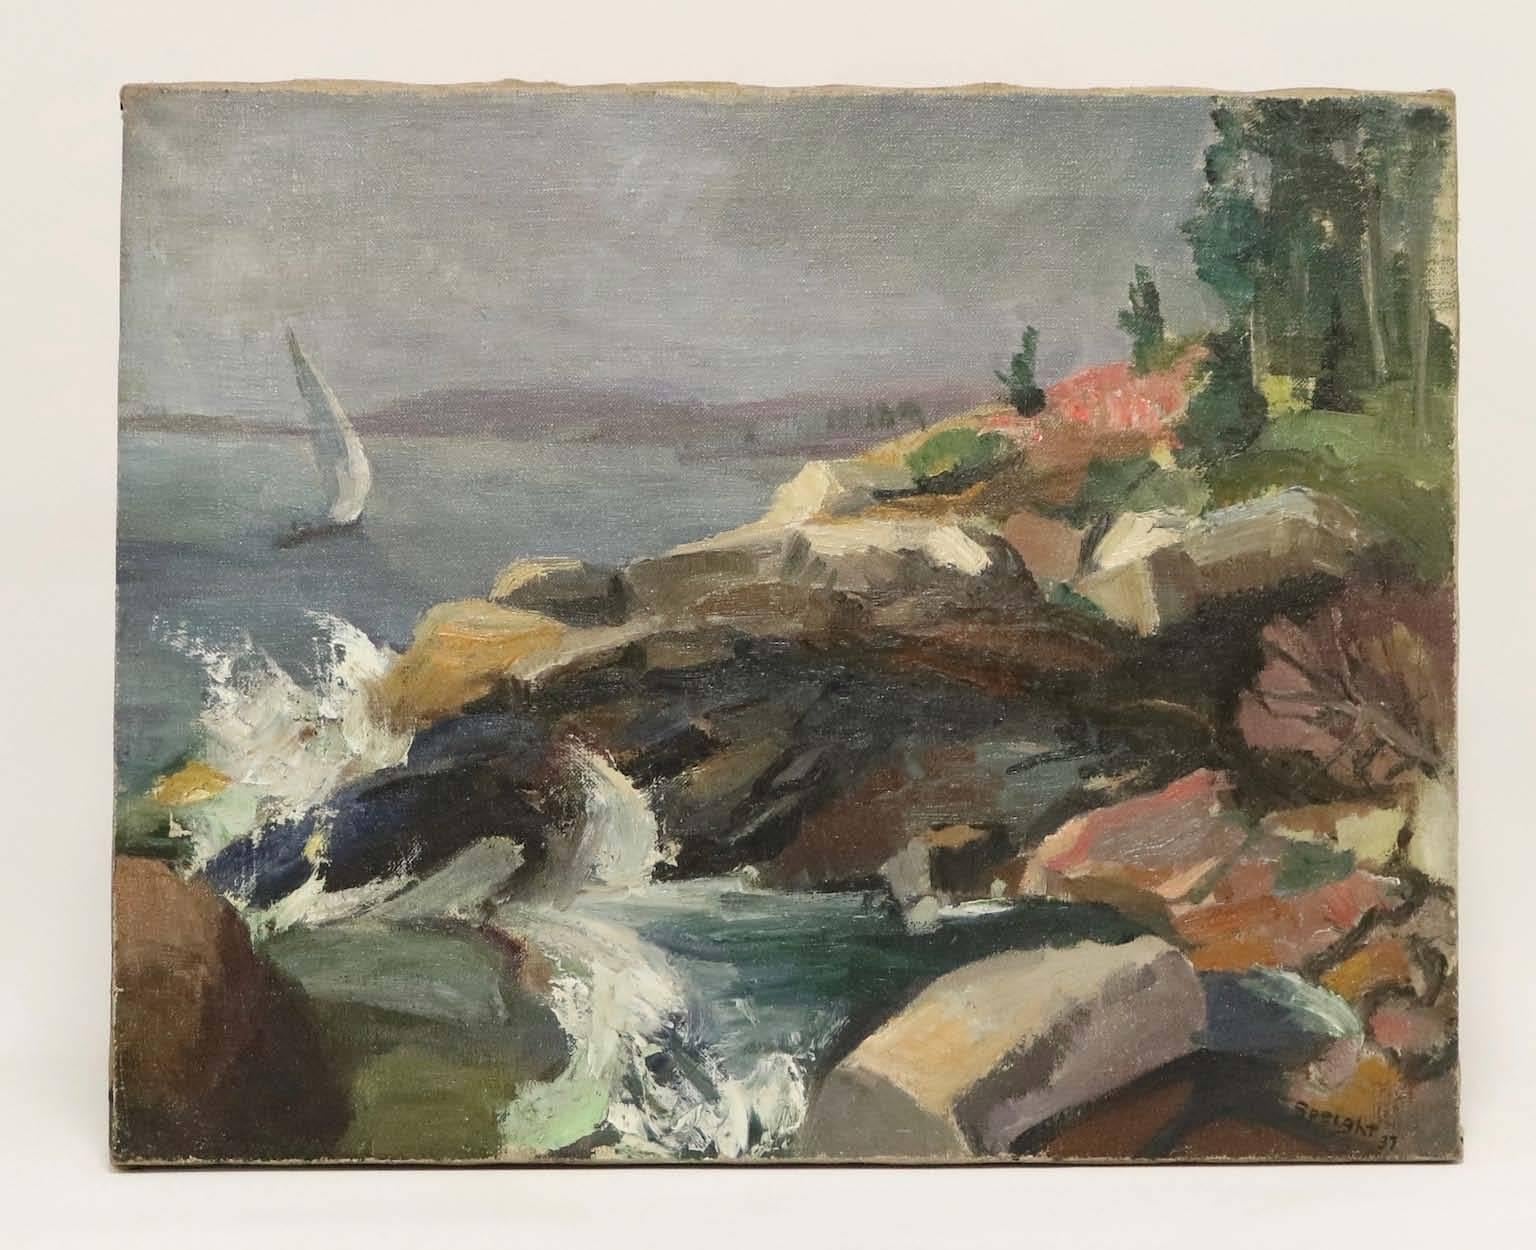  An oil on canvas painting by American artist Francis Speight (1896-1989), titled 'Summer in Maine' depicting an Expressionist manner landscape by the water. Markings include the artist's signature, signed and dated [Speight/ '37], [Summer in Maine/